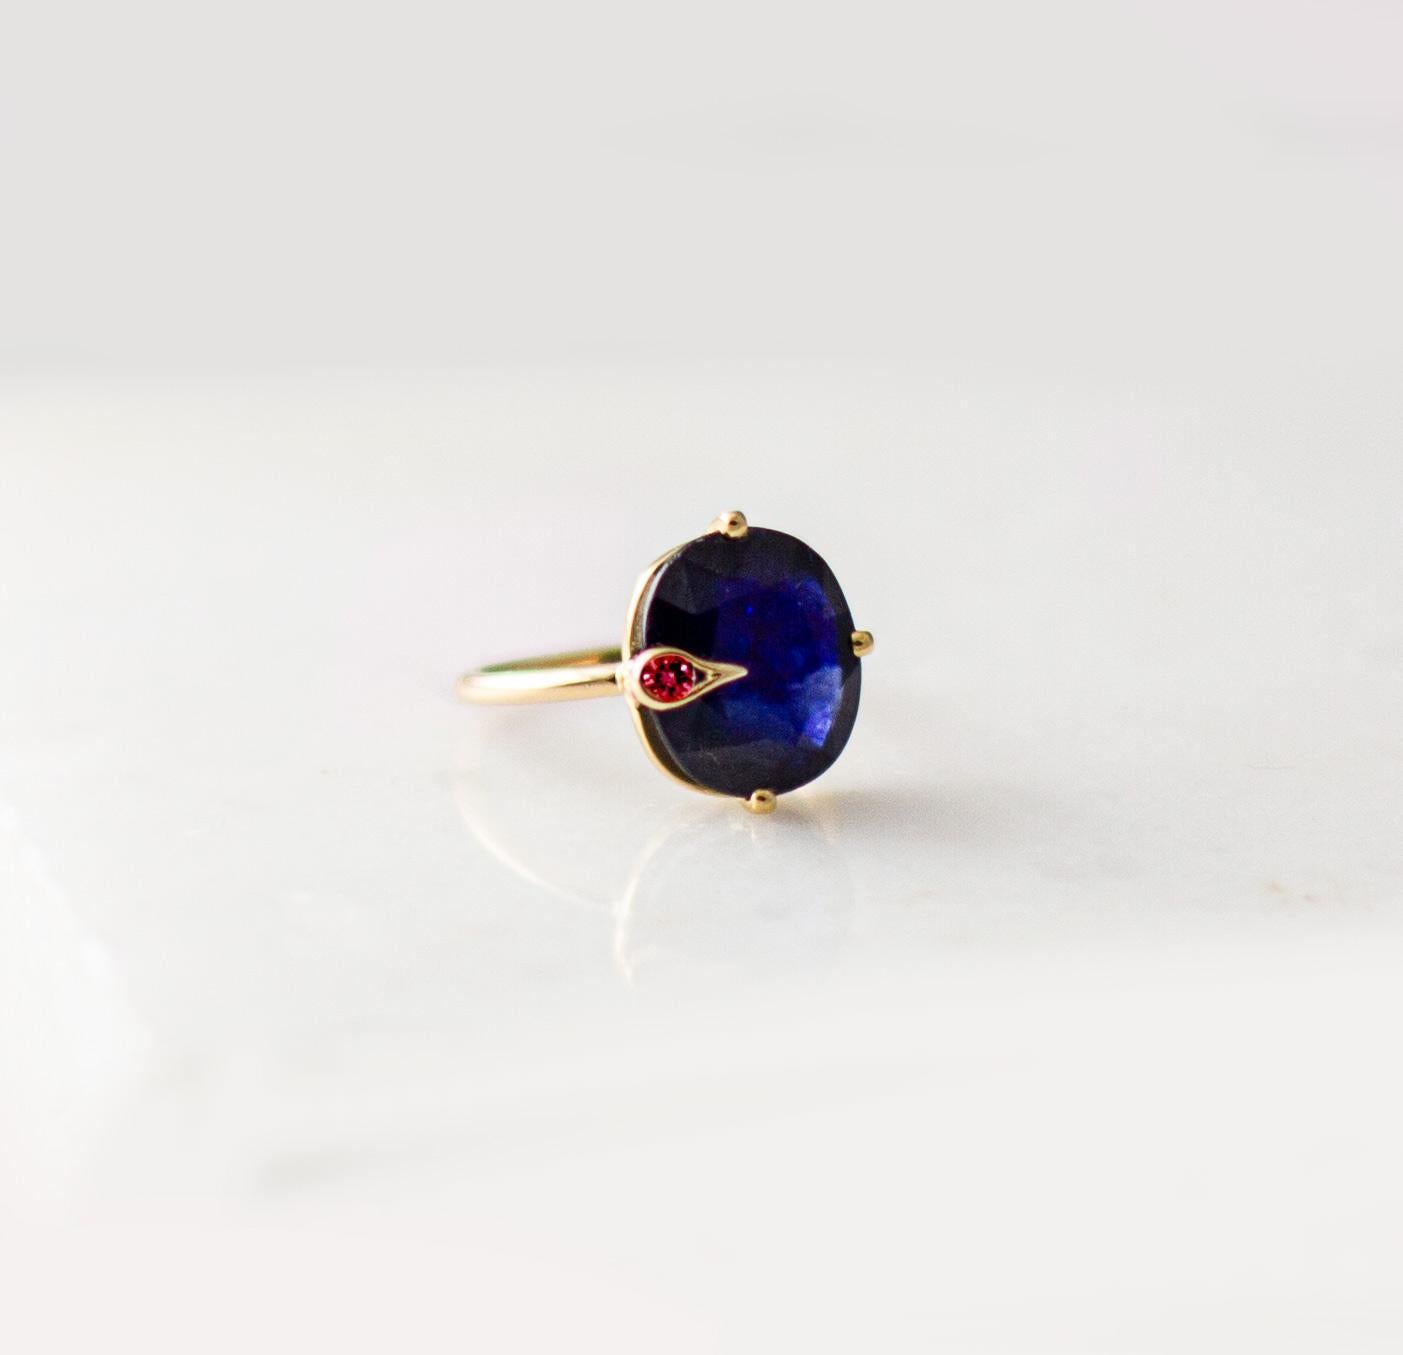 This contemporary Peacock ring is in 18 karat yellow gold with unheated natural cushion cut blue sapphire, 3.73 carats, 11.4x8.2 mm, and round ruby. The ring is easy to wear, and the gem catches eye's attention. 
The collection is connected to the